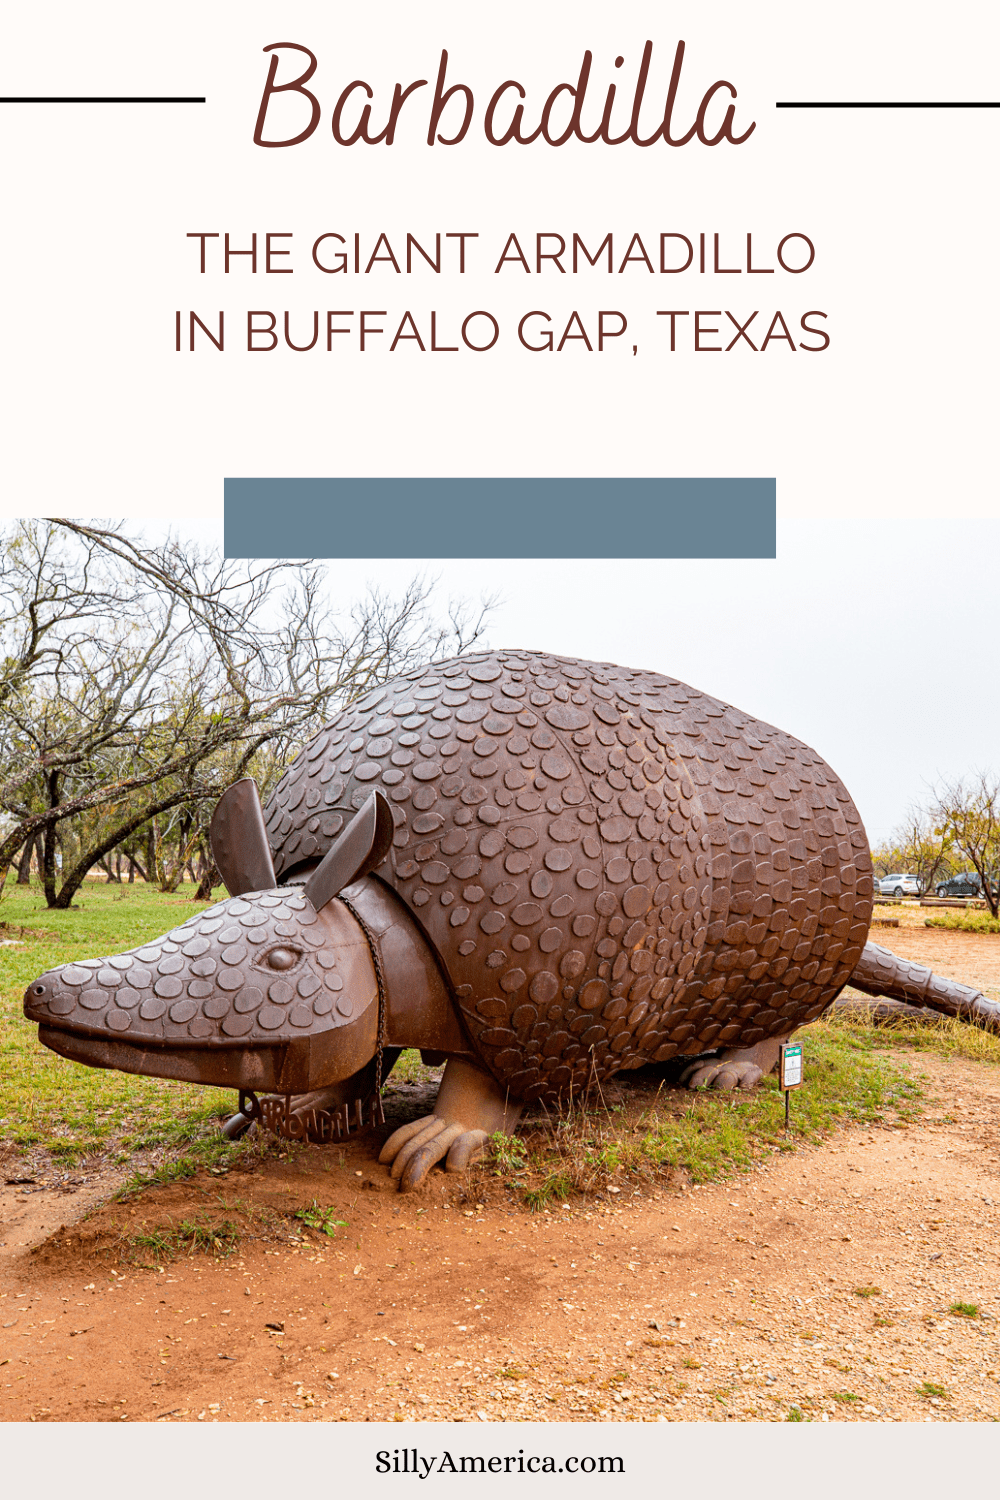 What's the dillo with this Texas roadside attraction? It's Barbadilla: the Giant Armadillo in Buffalo Gap, Texas. Barbadilla is a 30-foot-long metal armadillo sculpture that has stood outside Perini Ranch Steakhouse since 2009. Designed by sculptor Joe Barrington of Red Star Studio in Throckmorton, Texas, Barbadilla is a much-loved attraction that beckons road trippers to stop for a selfie, and a steak. Visit this Texas roadisde attraction on a Texas road trip! #RoadsideAttraction #RoadTrip